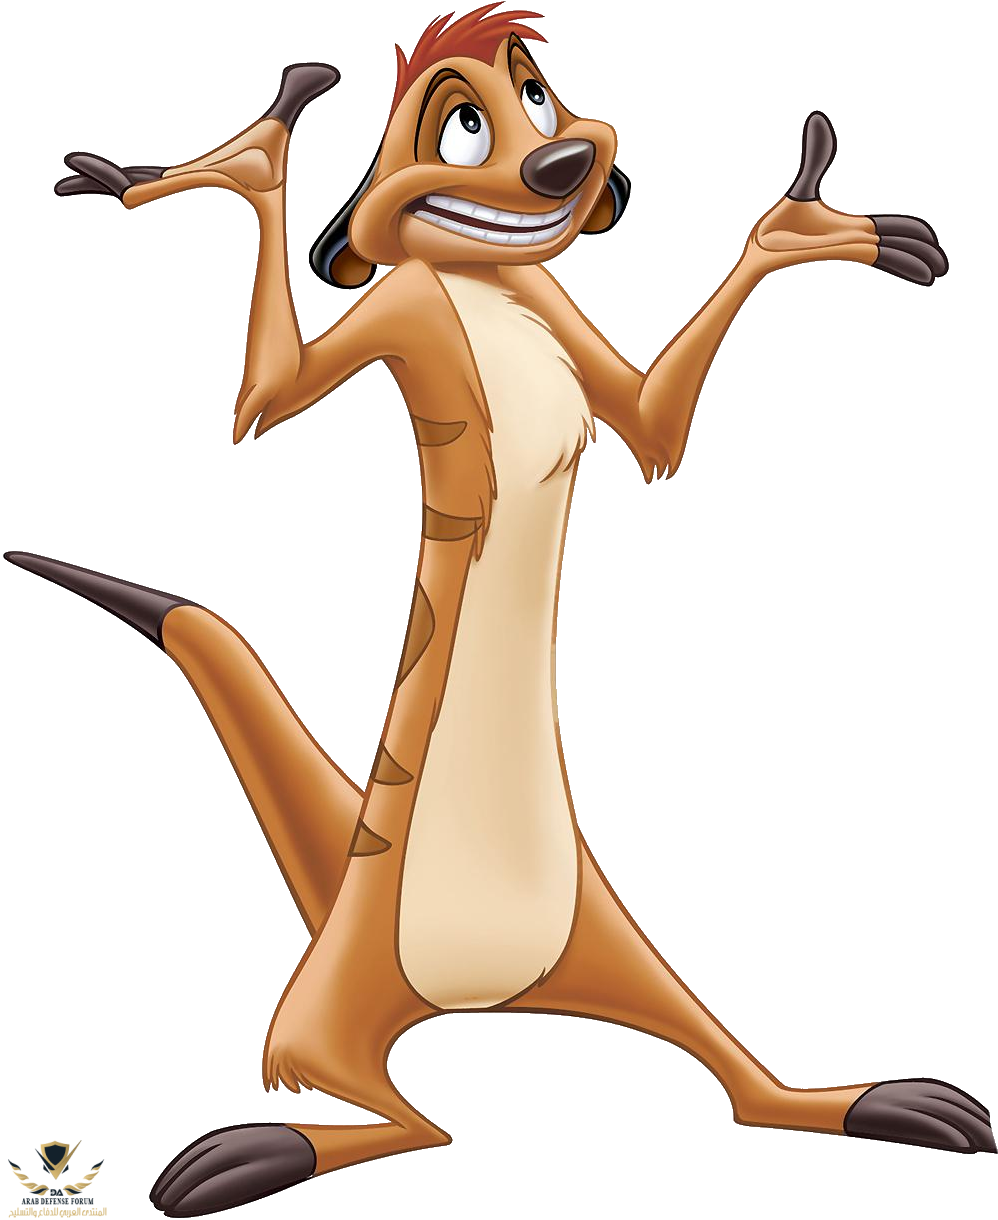 Timon_1.png